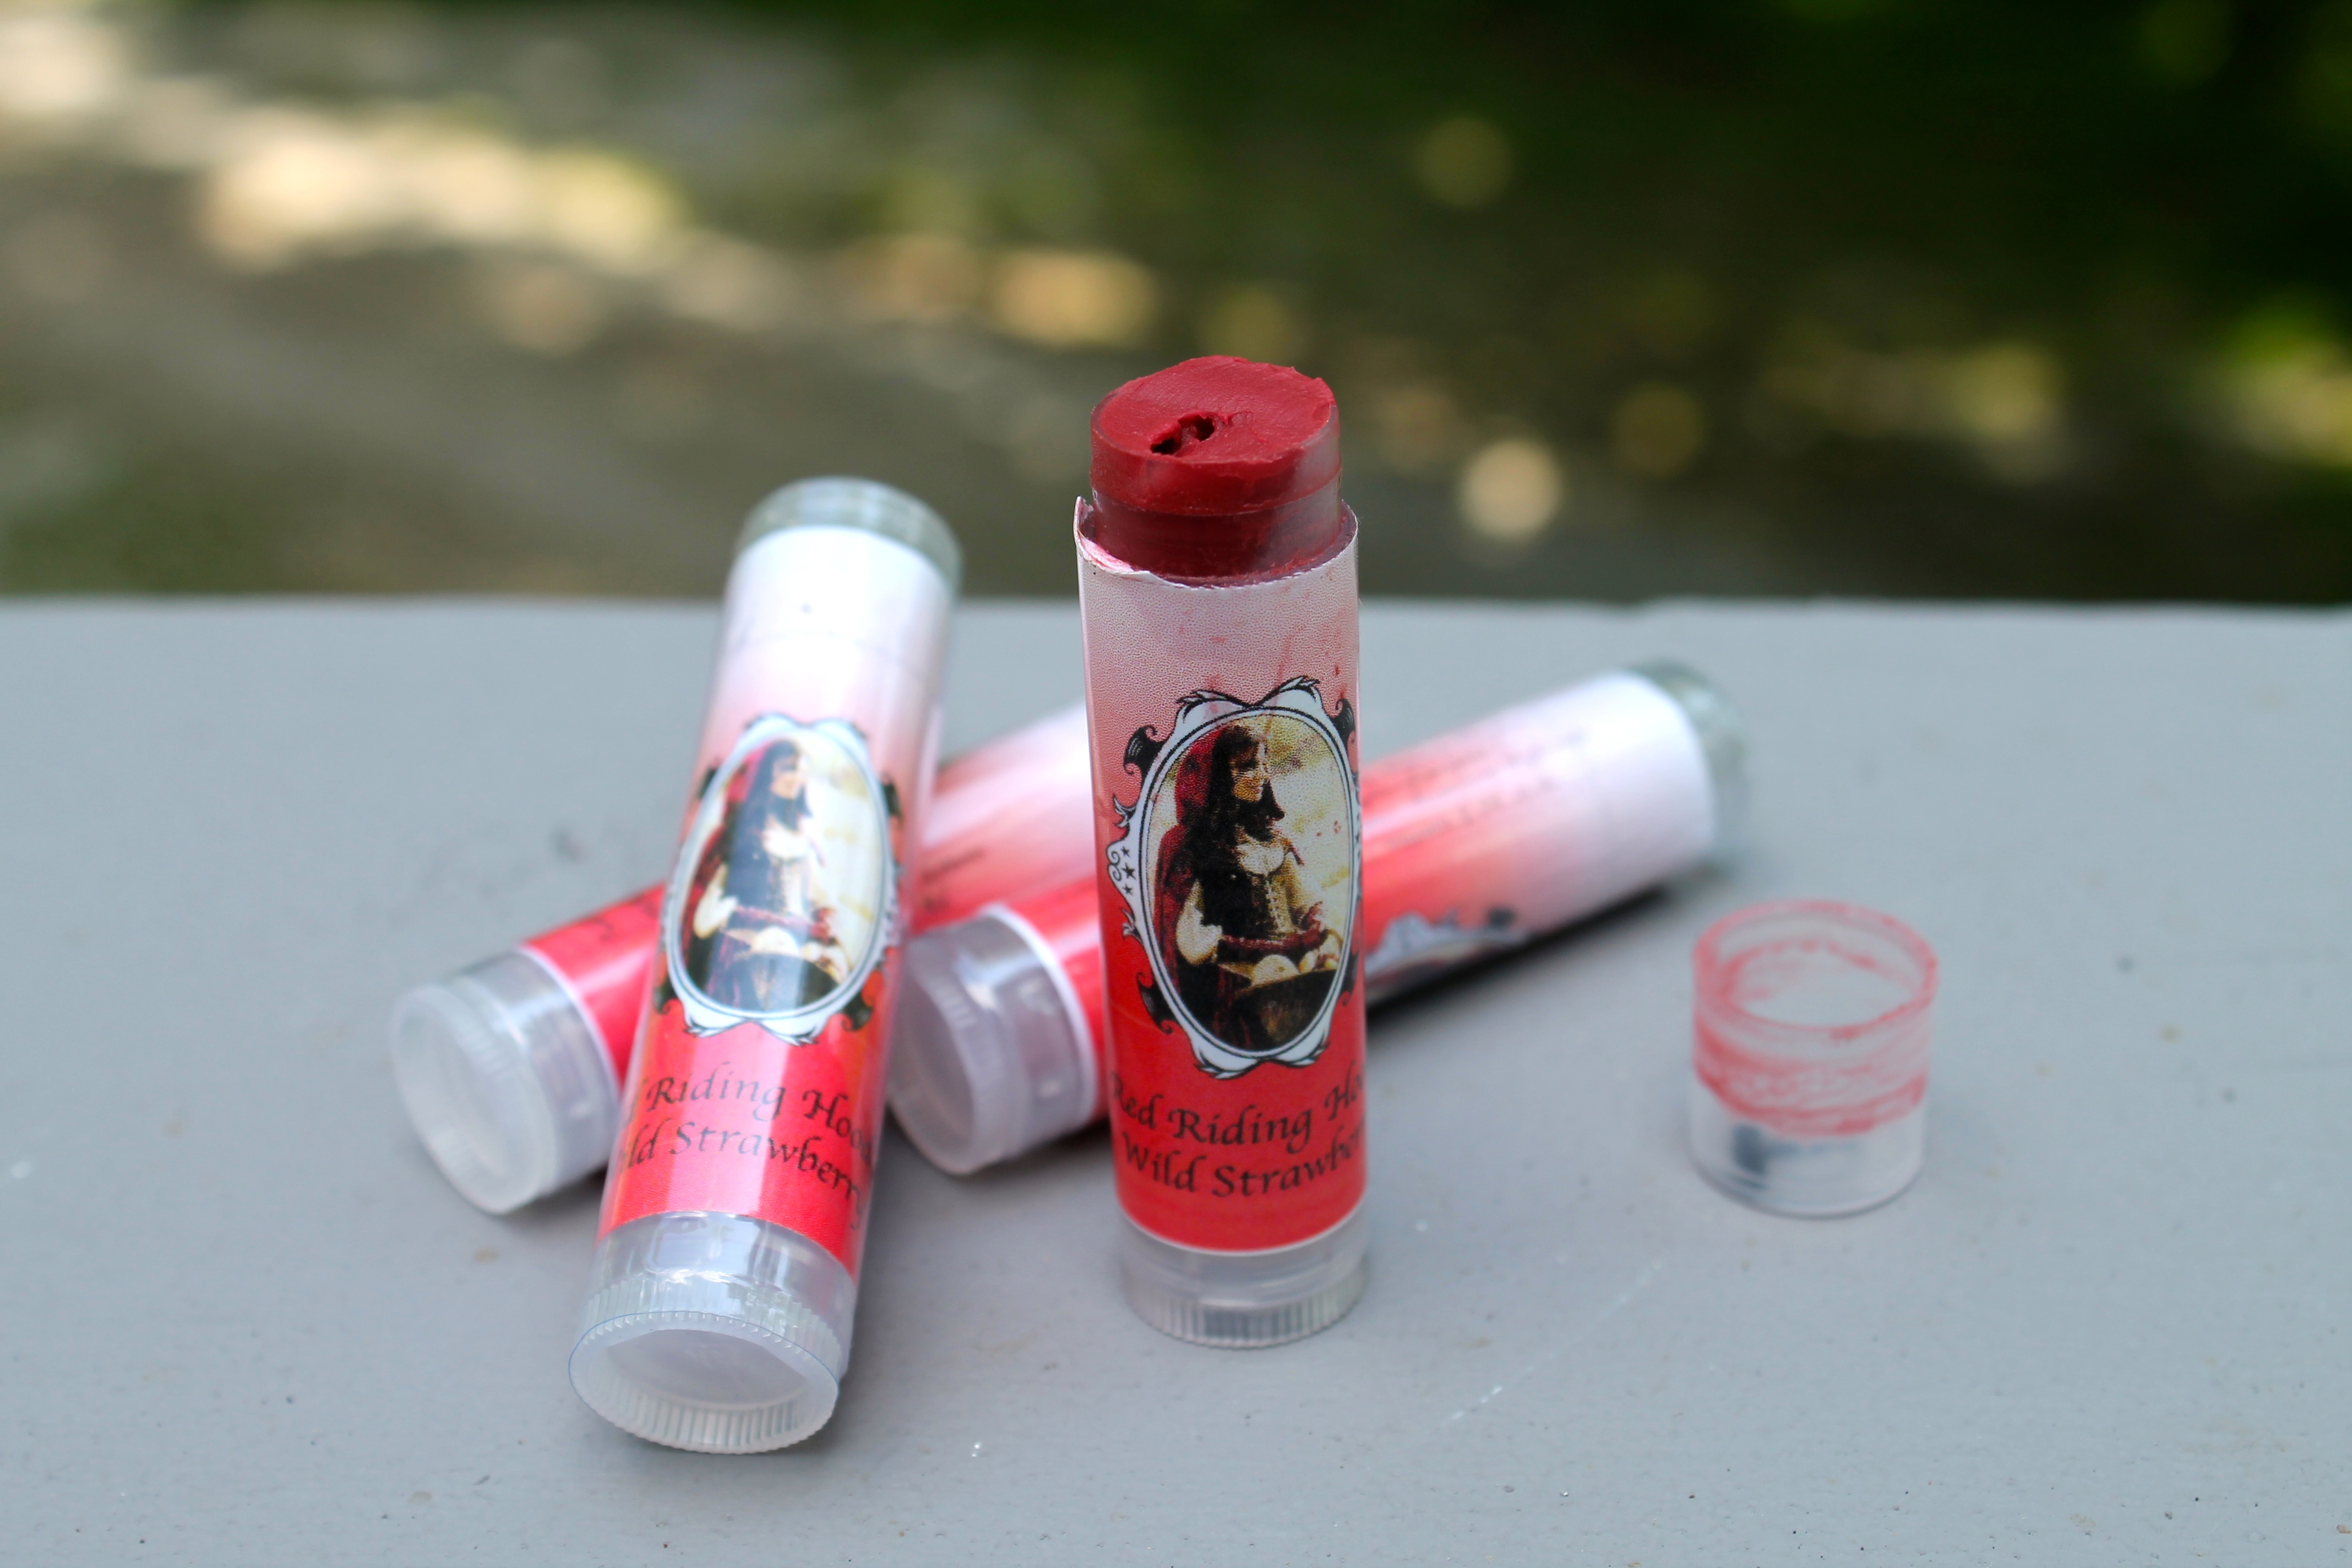 Red Riding Hood's Lip balm in Wild Strawberry with a slight pink tint